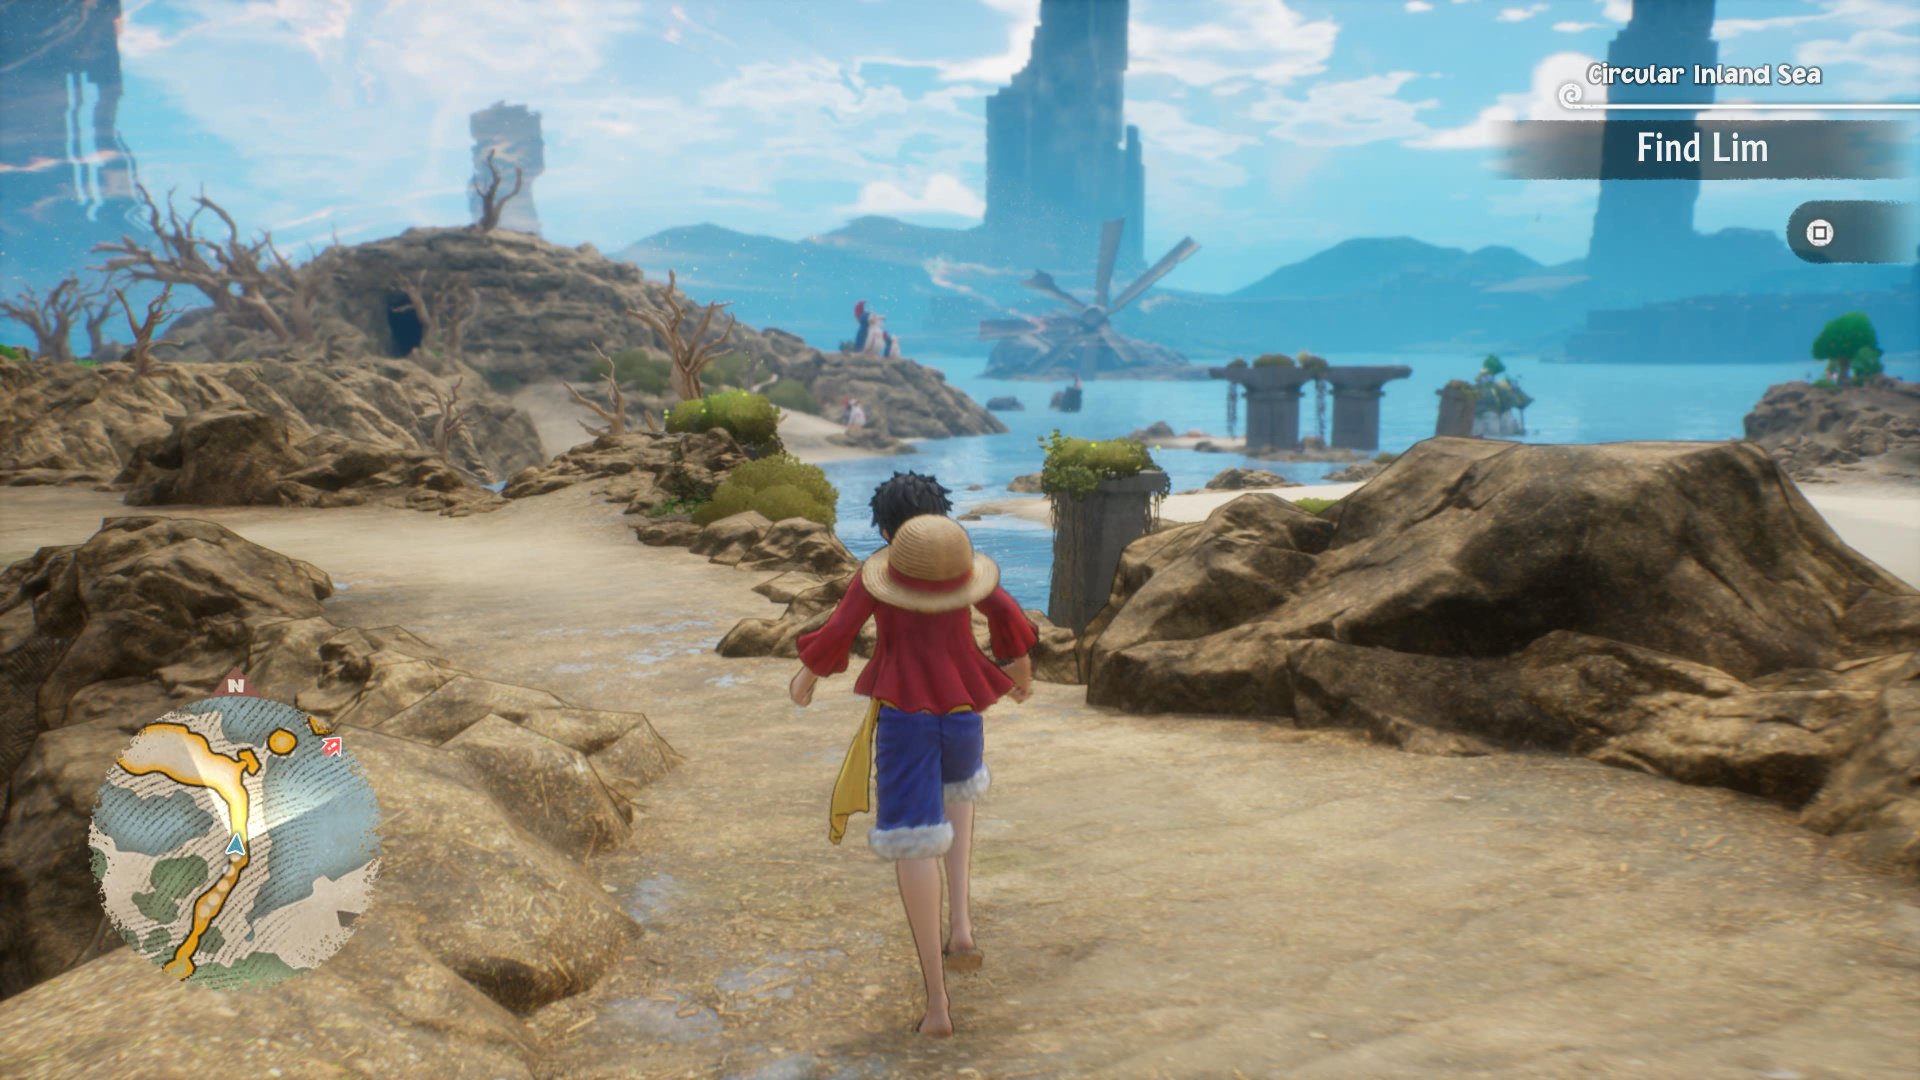 One Piece Odyssey review: 'The best One Piece game yet' - Video